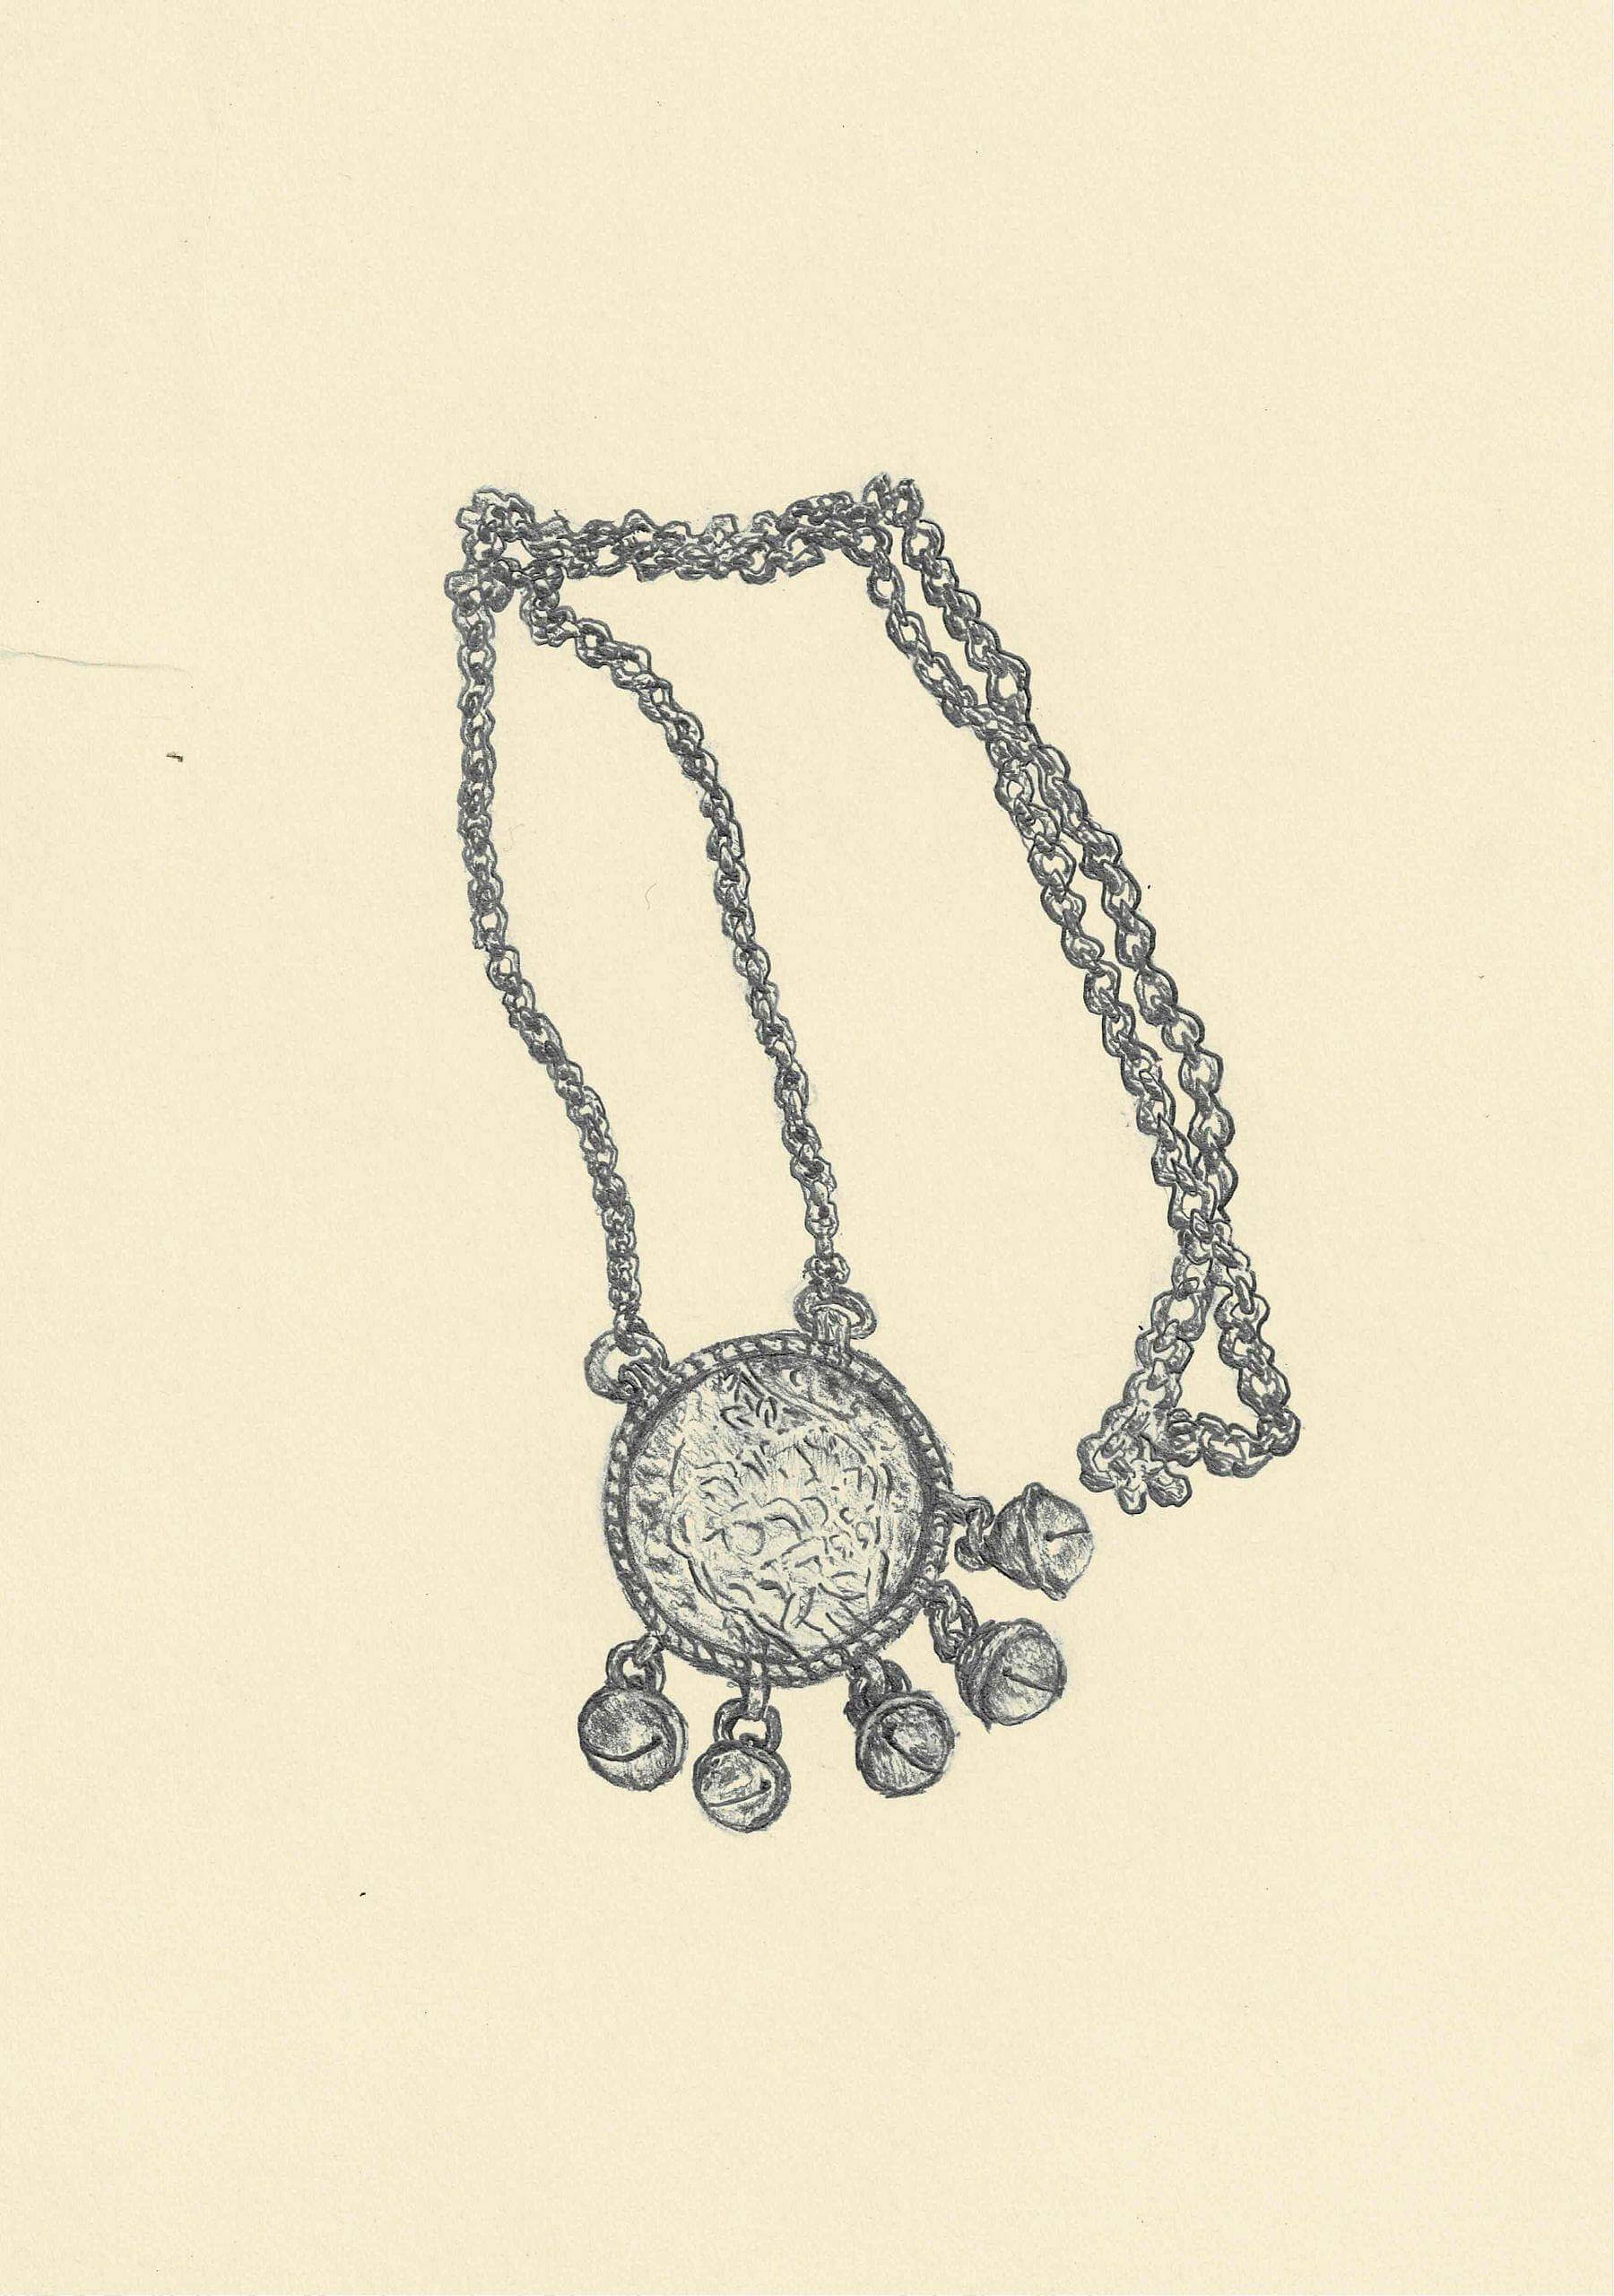 drawing of an amulet necklace inscribed with names of God